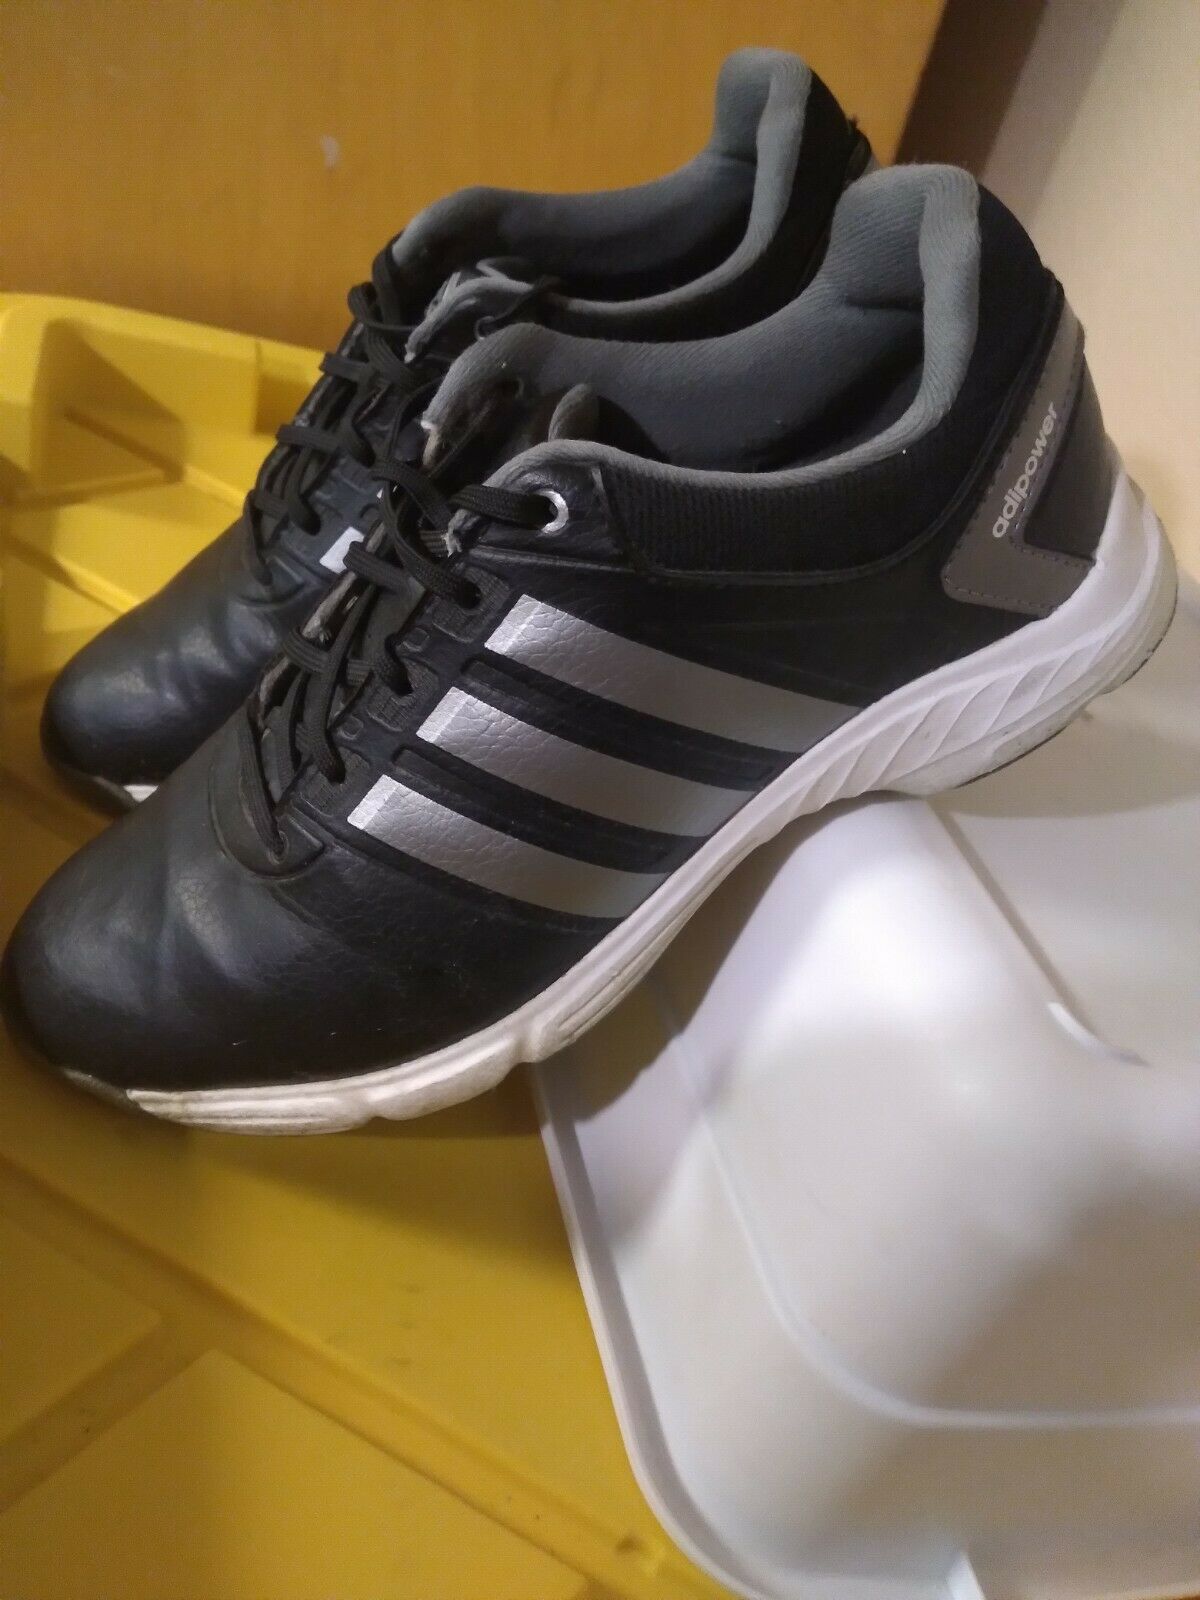 Adidas Adipower Weightlifting Shoes Women's Black SZ 5 - ON SALE!